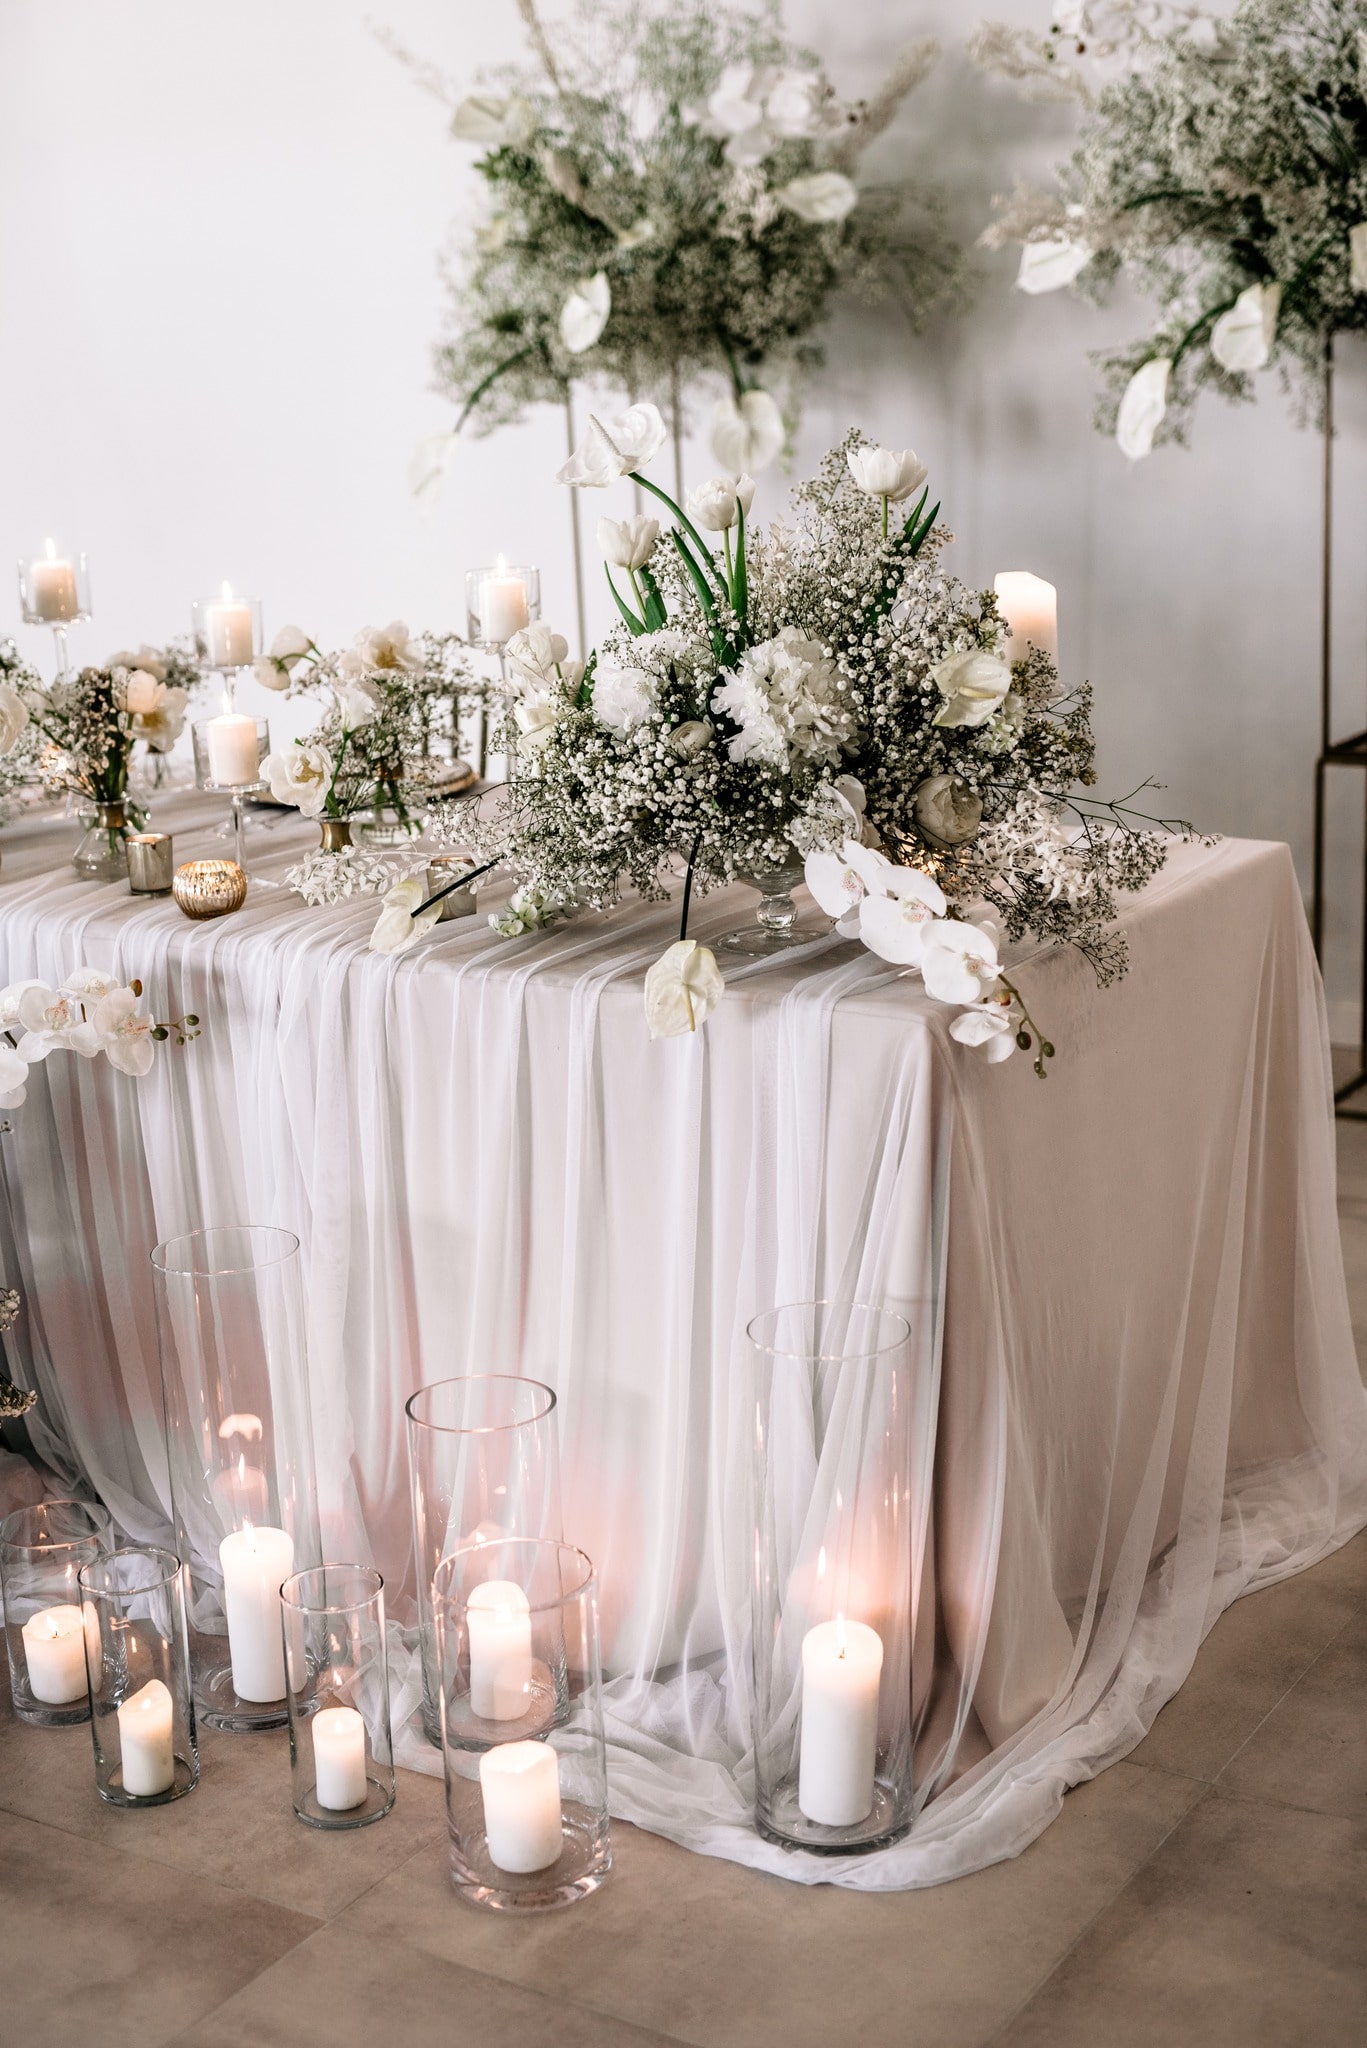 A table decorated with white flowers